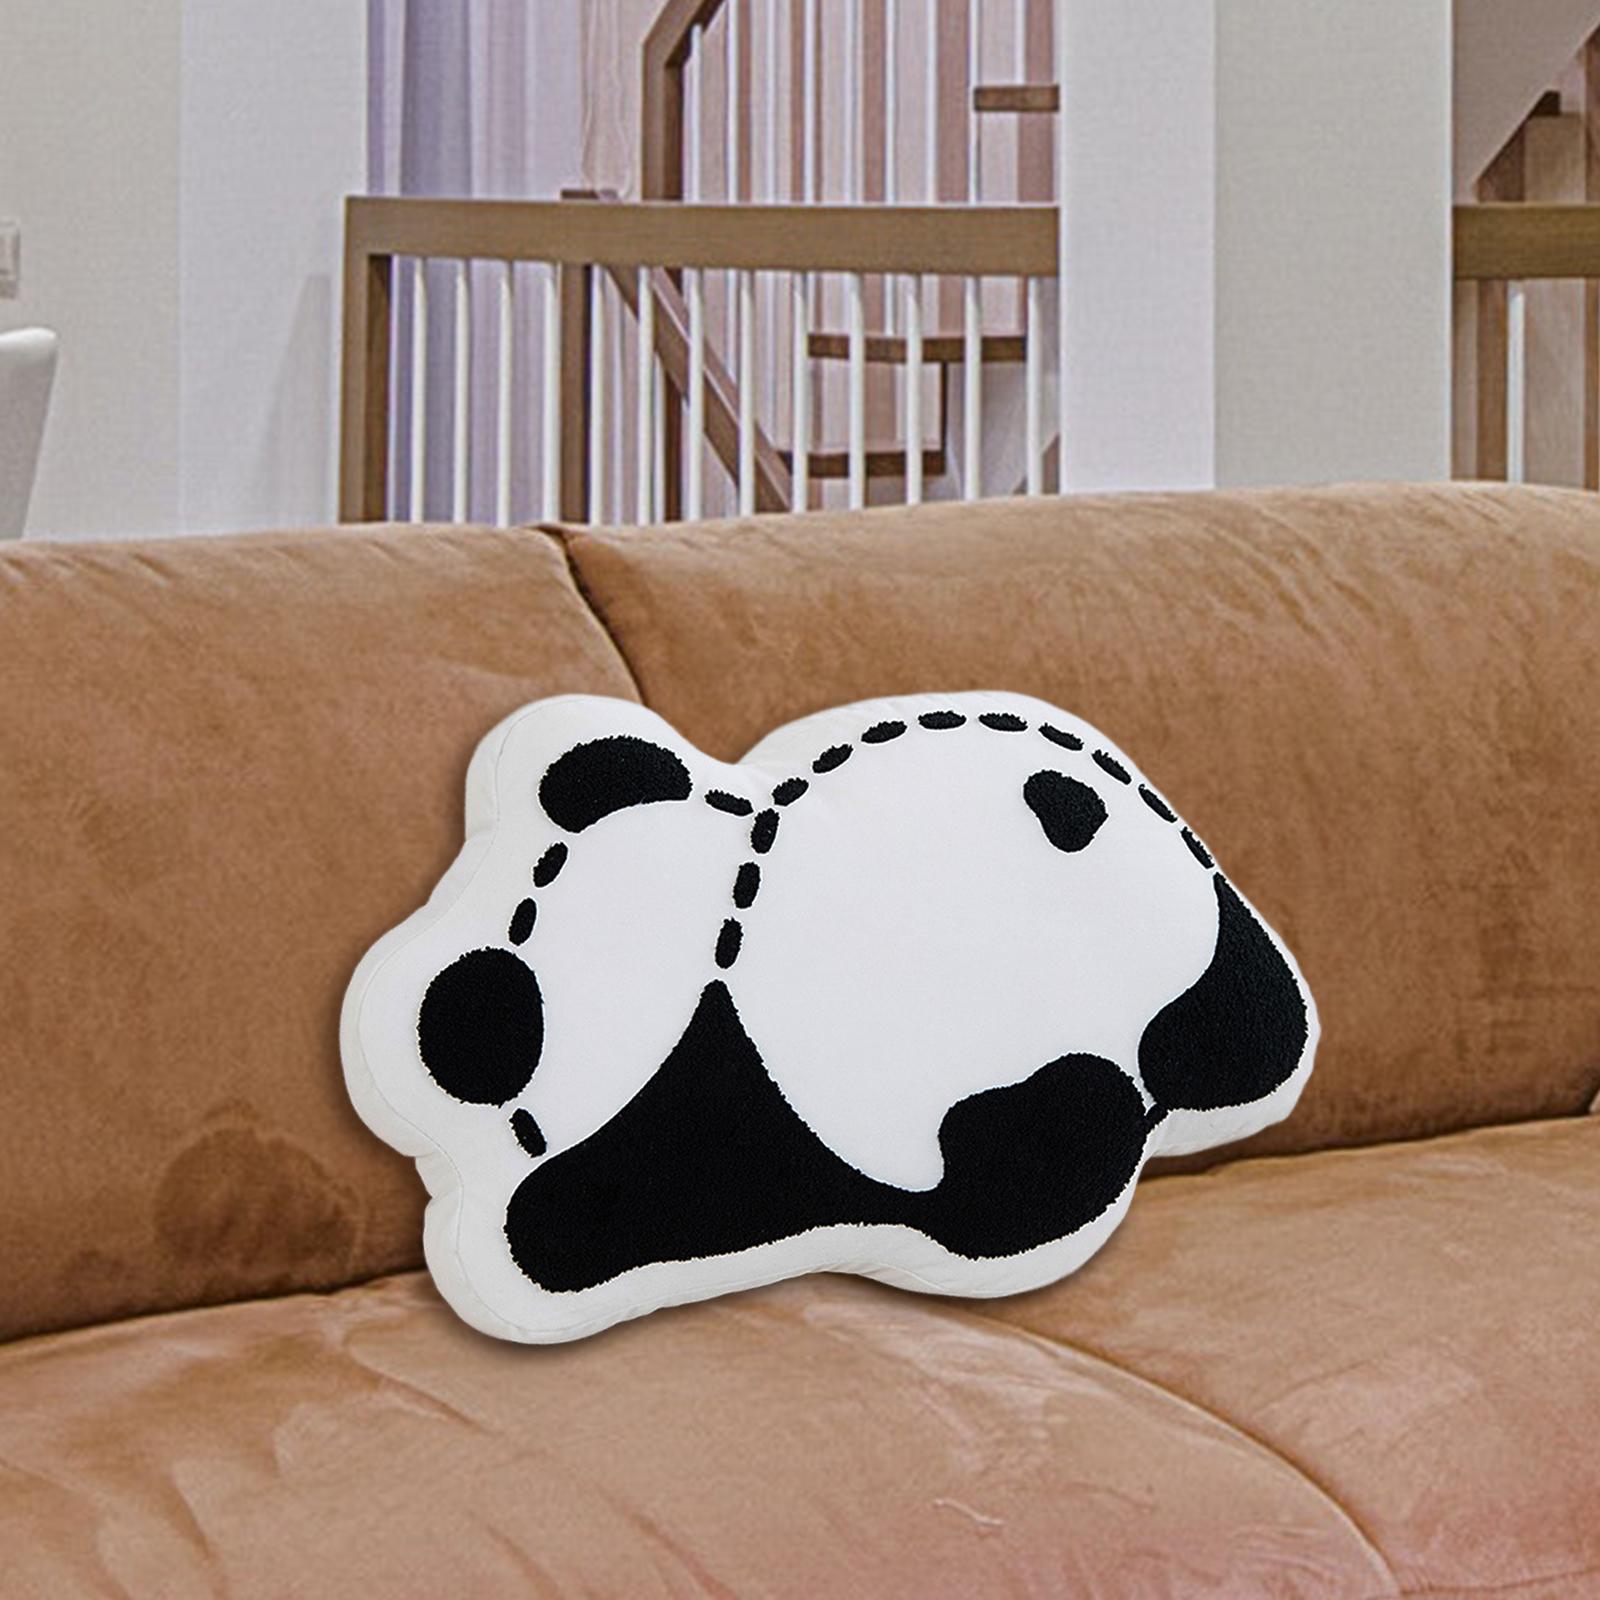 Panda Plush Pillow Soft Gifts Cute Plush Toy for Adults Gaming Bedroom White